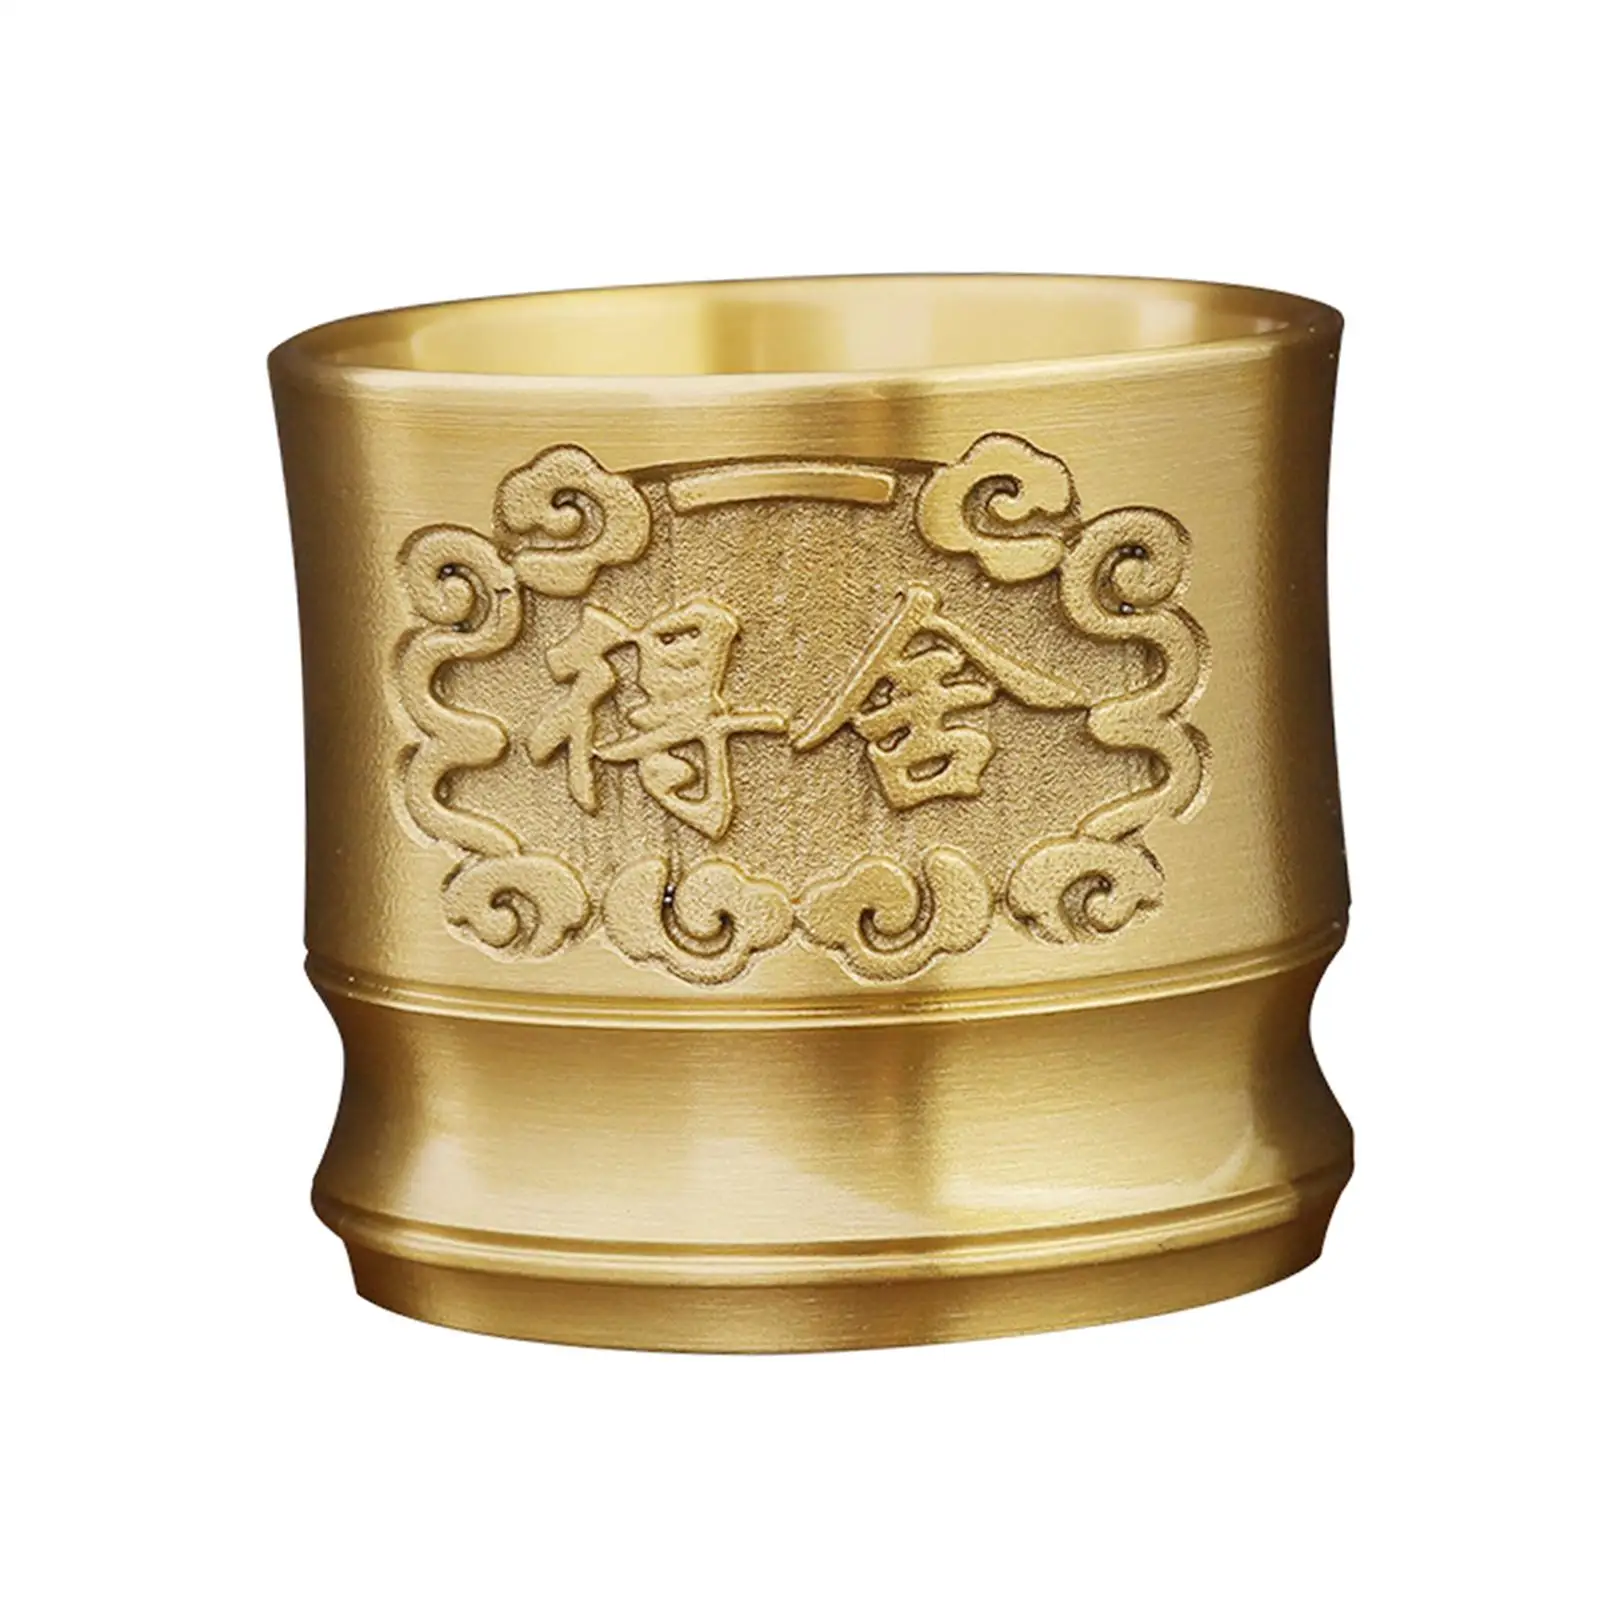 Brass Cup Collection Personal Teacup for Home Desk Decoration